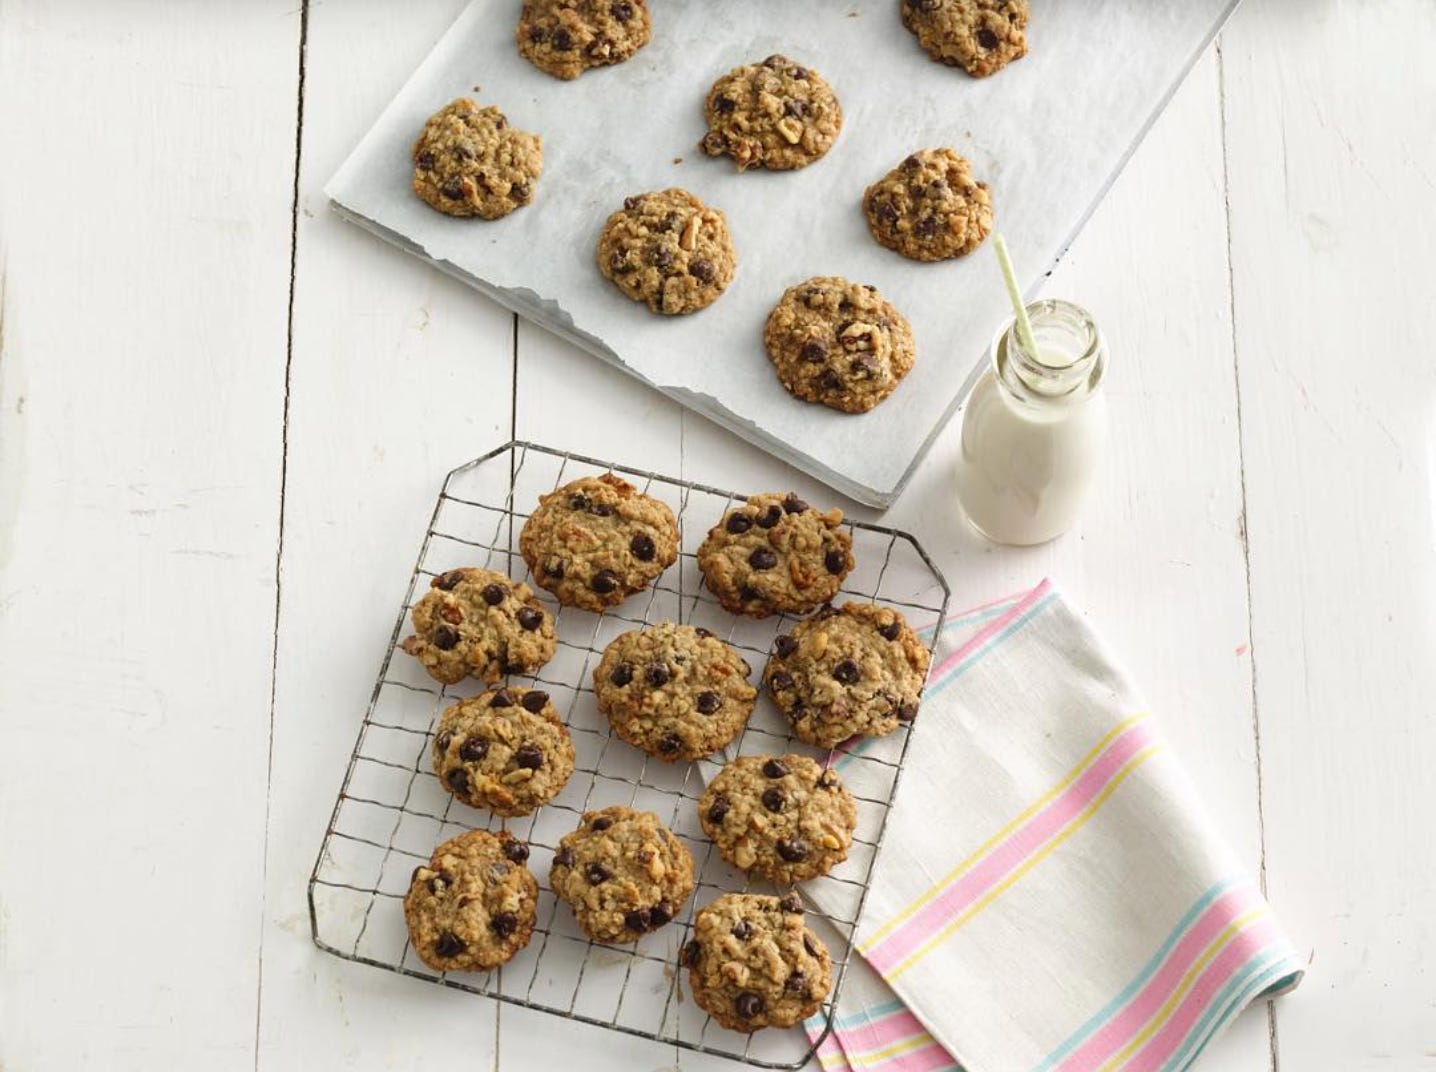 Image shows freshly baked cookies cooling on a baking sheet and a cooling rack plus a glass bottle of milk with a straw in it.